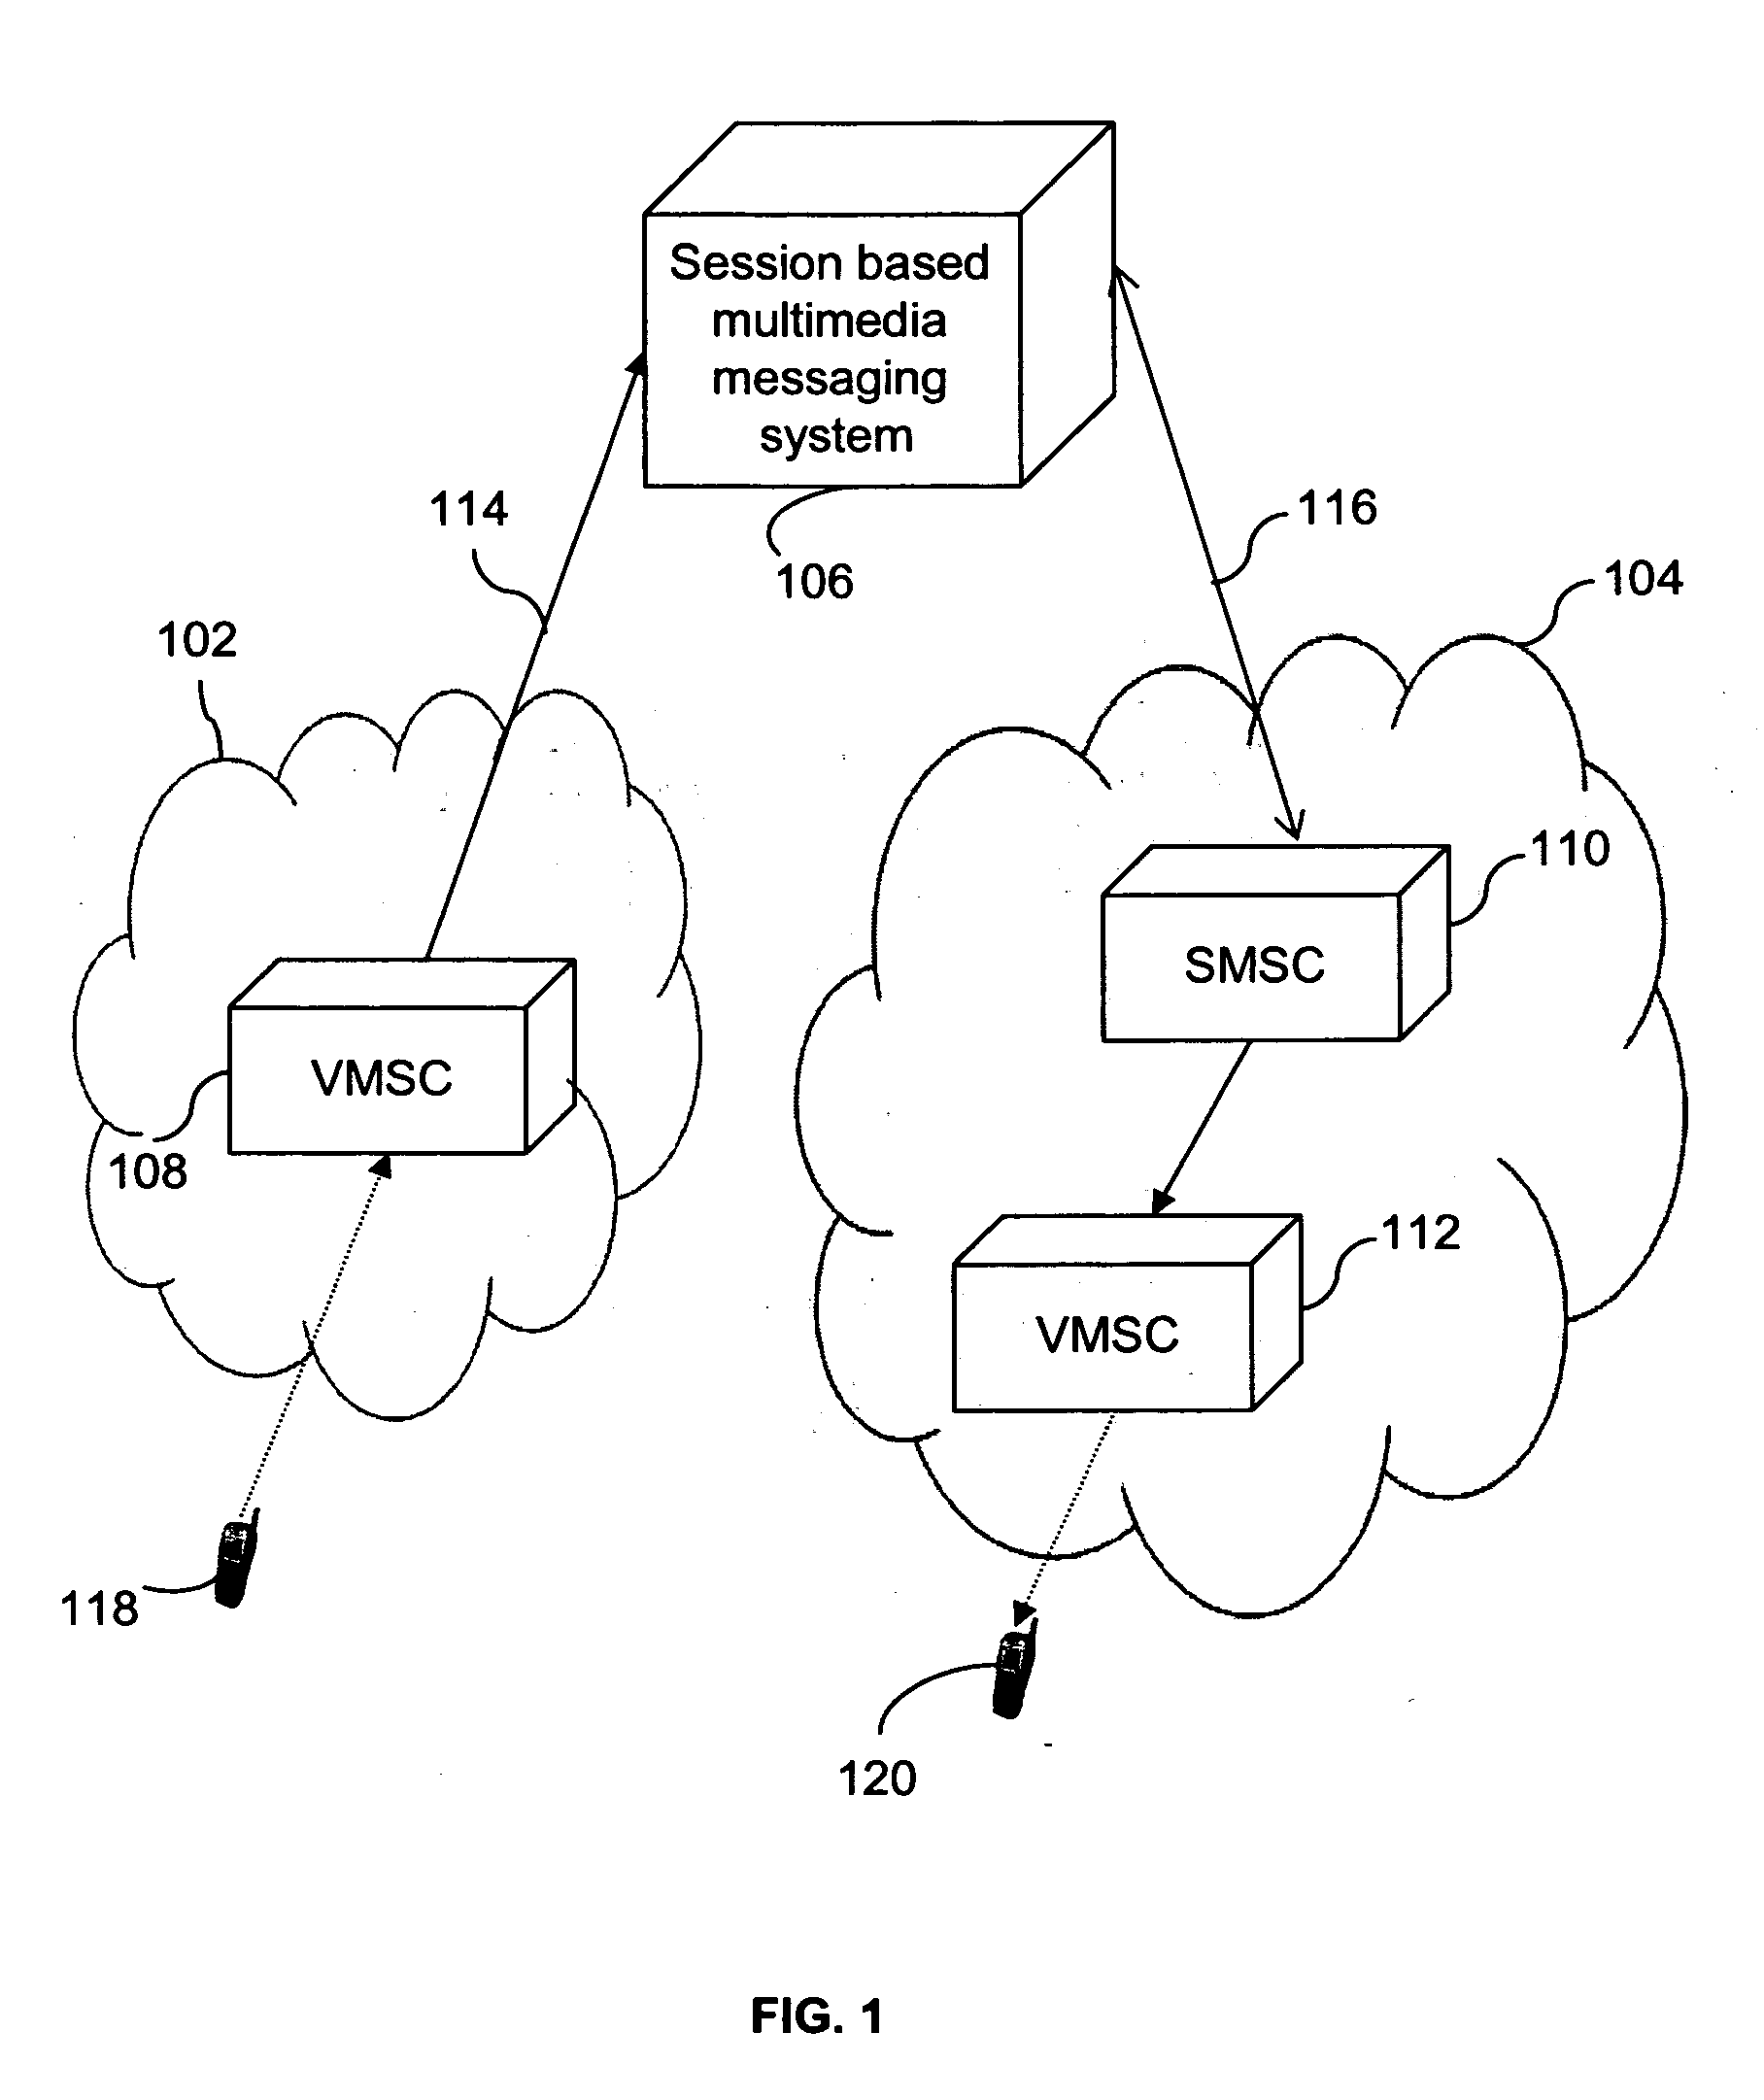 Session-based multimedia messaging service